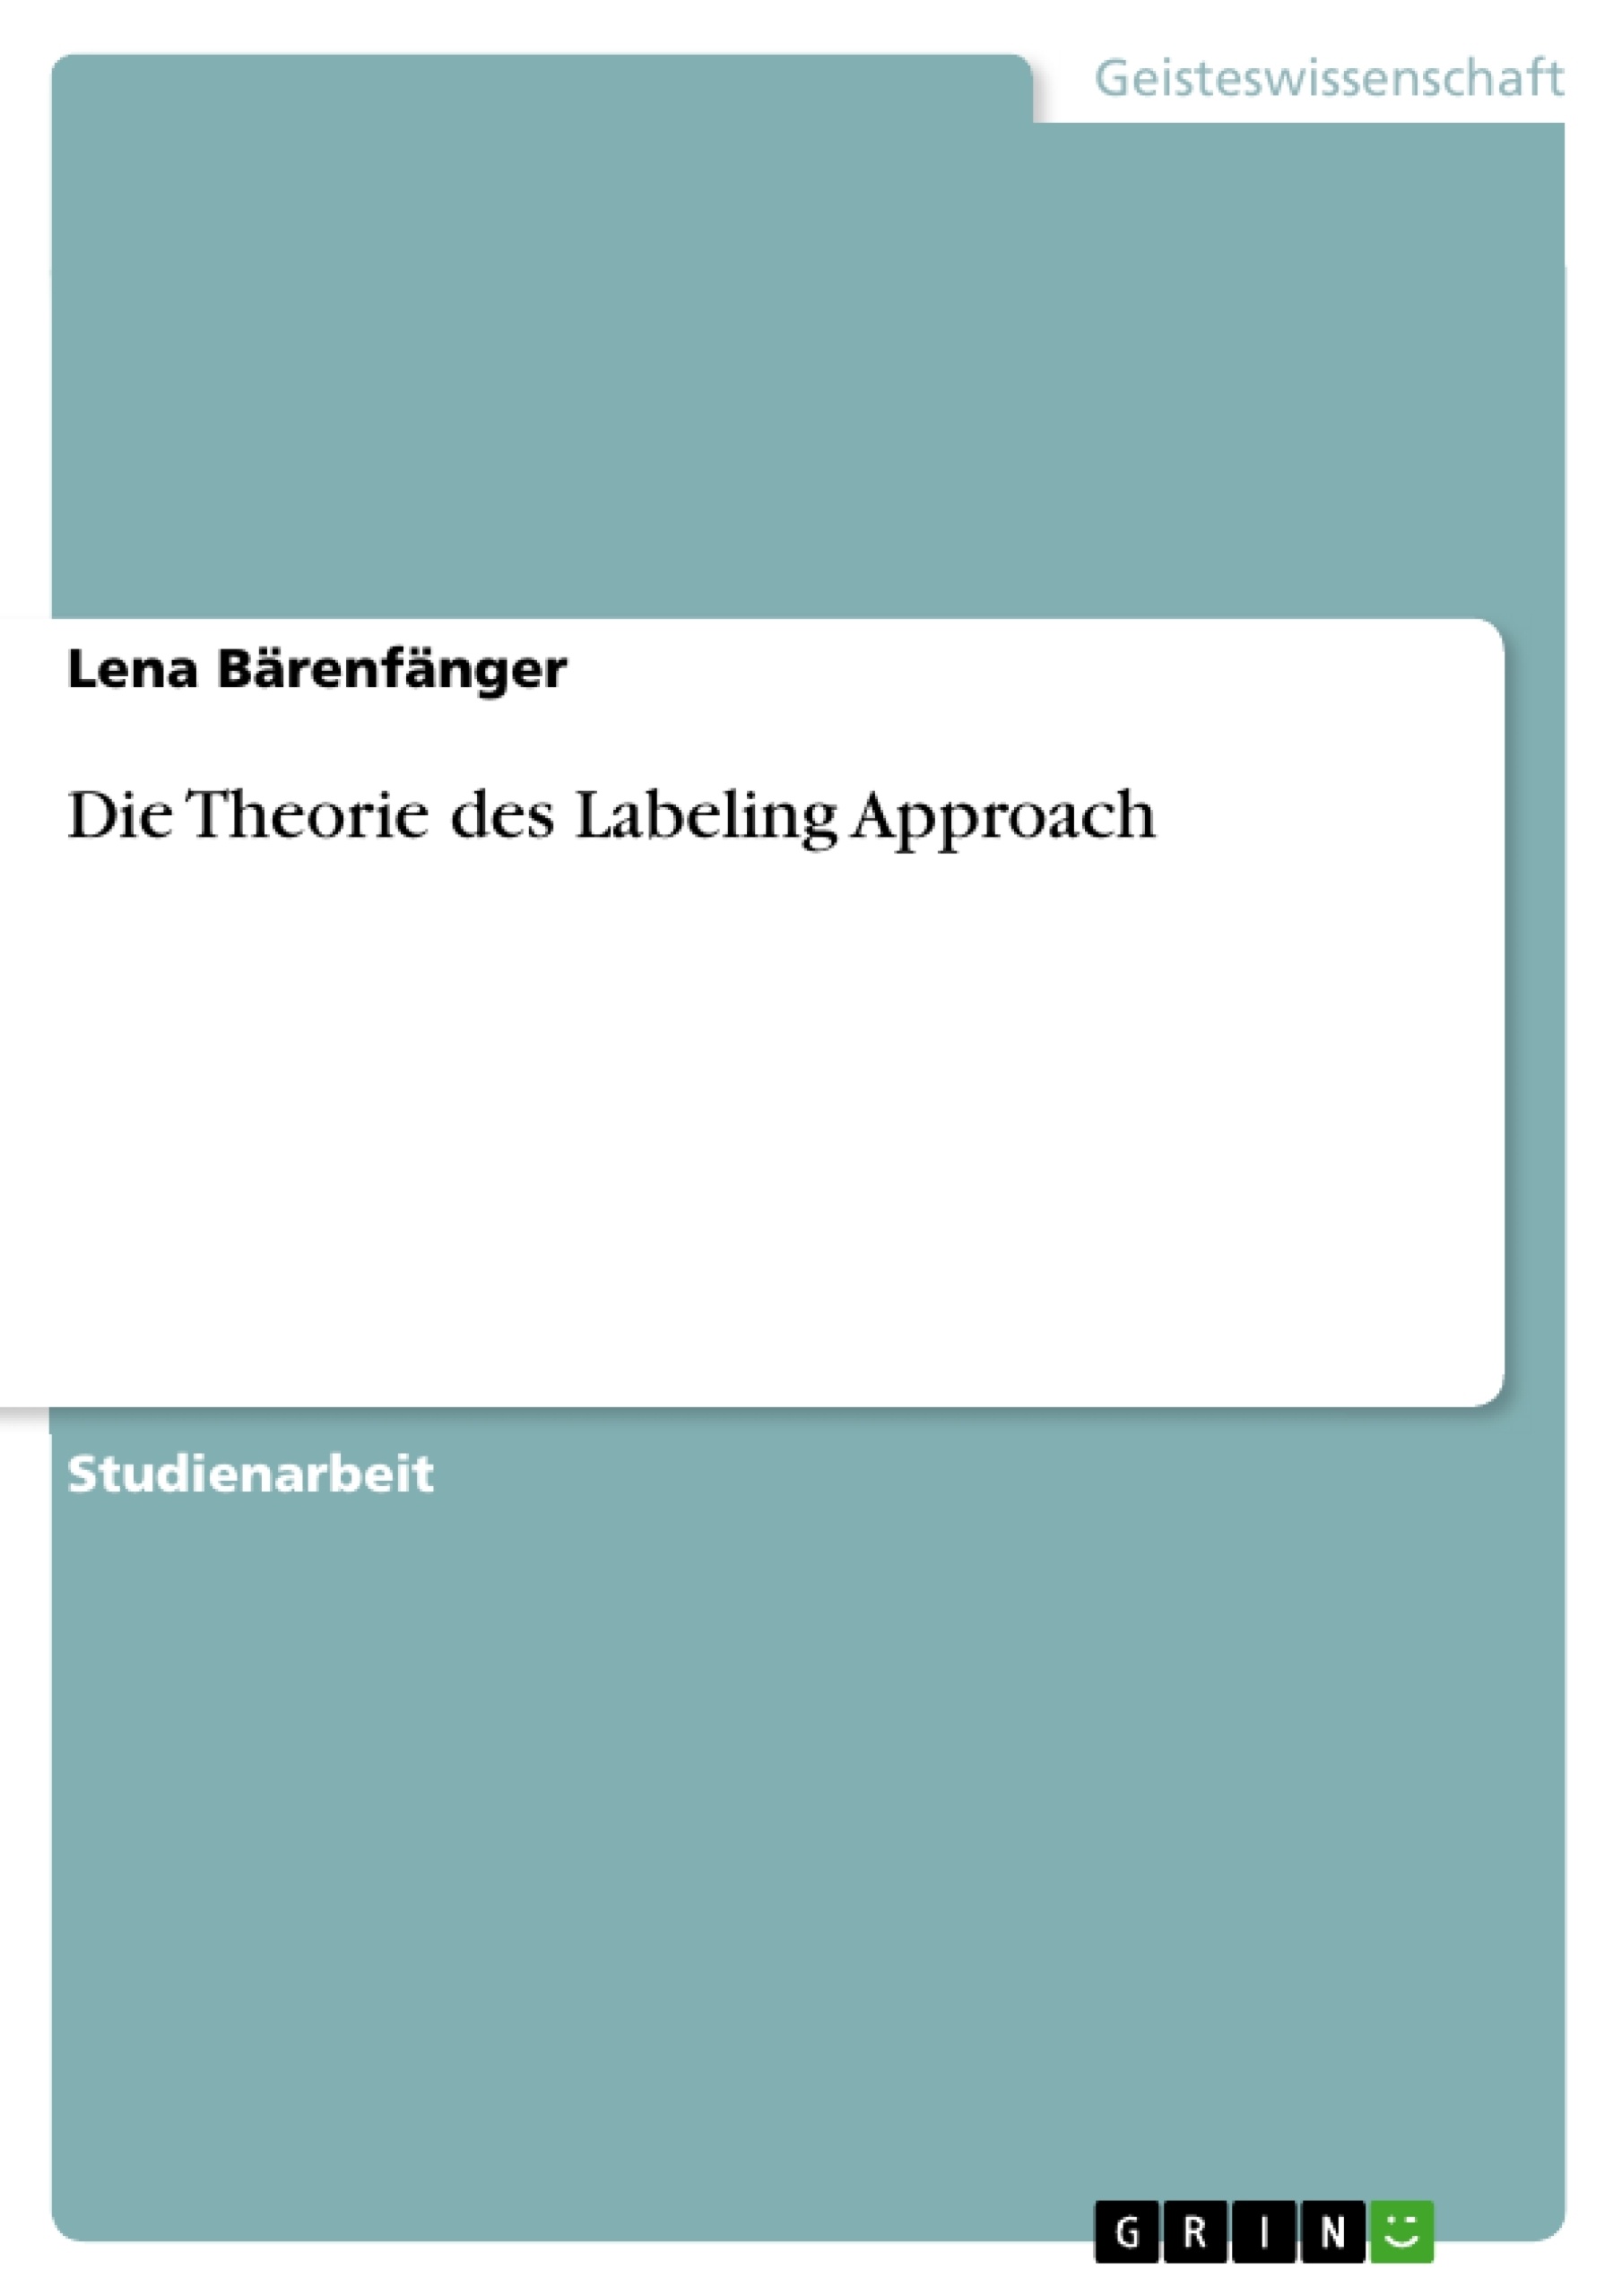 Título: Die Theorie des Labeling Approach